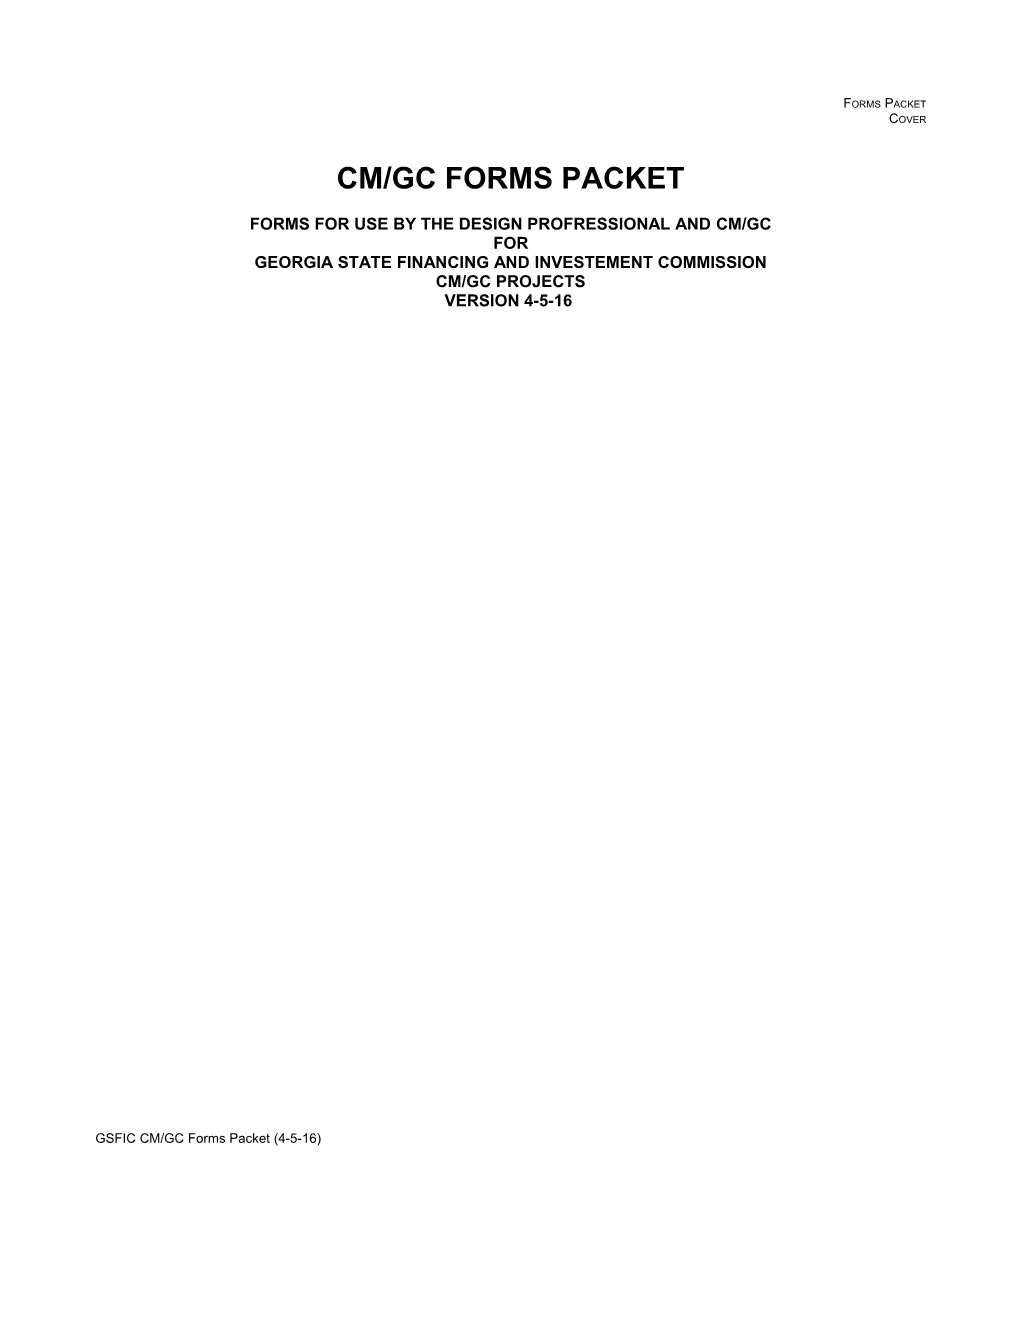 Forms for Use by CM and DP on CM/GC Projects